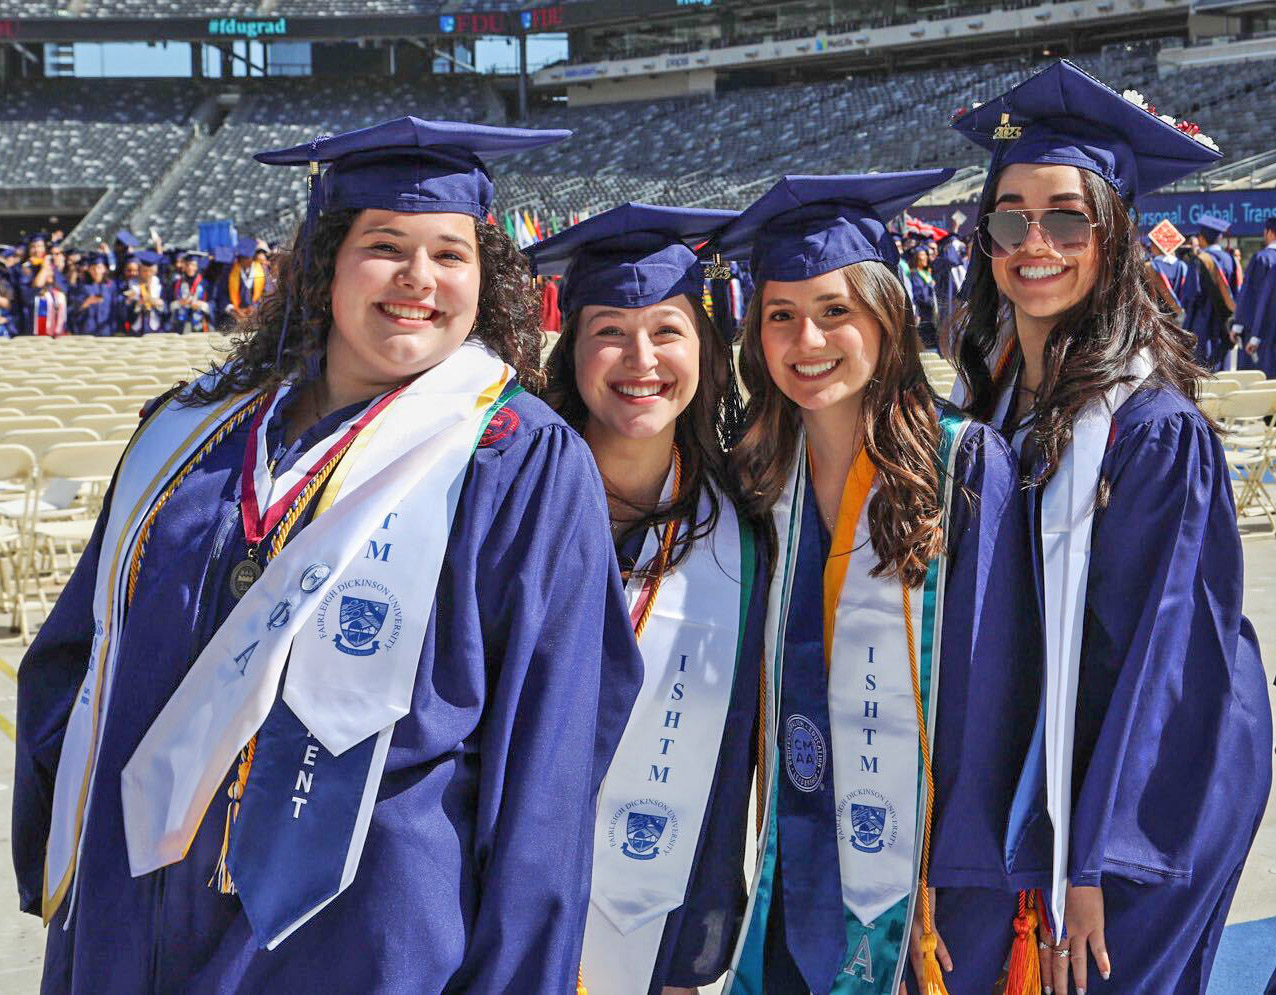 Four female graduates, wearing caps, gowns and sashes, pose for a photo.